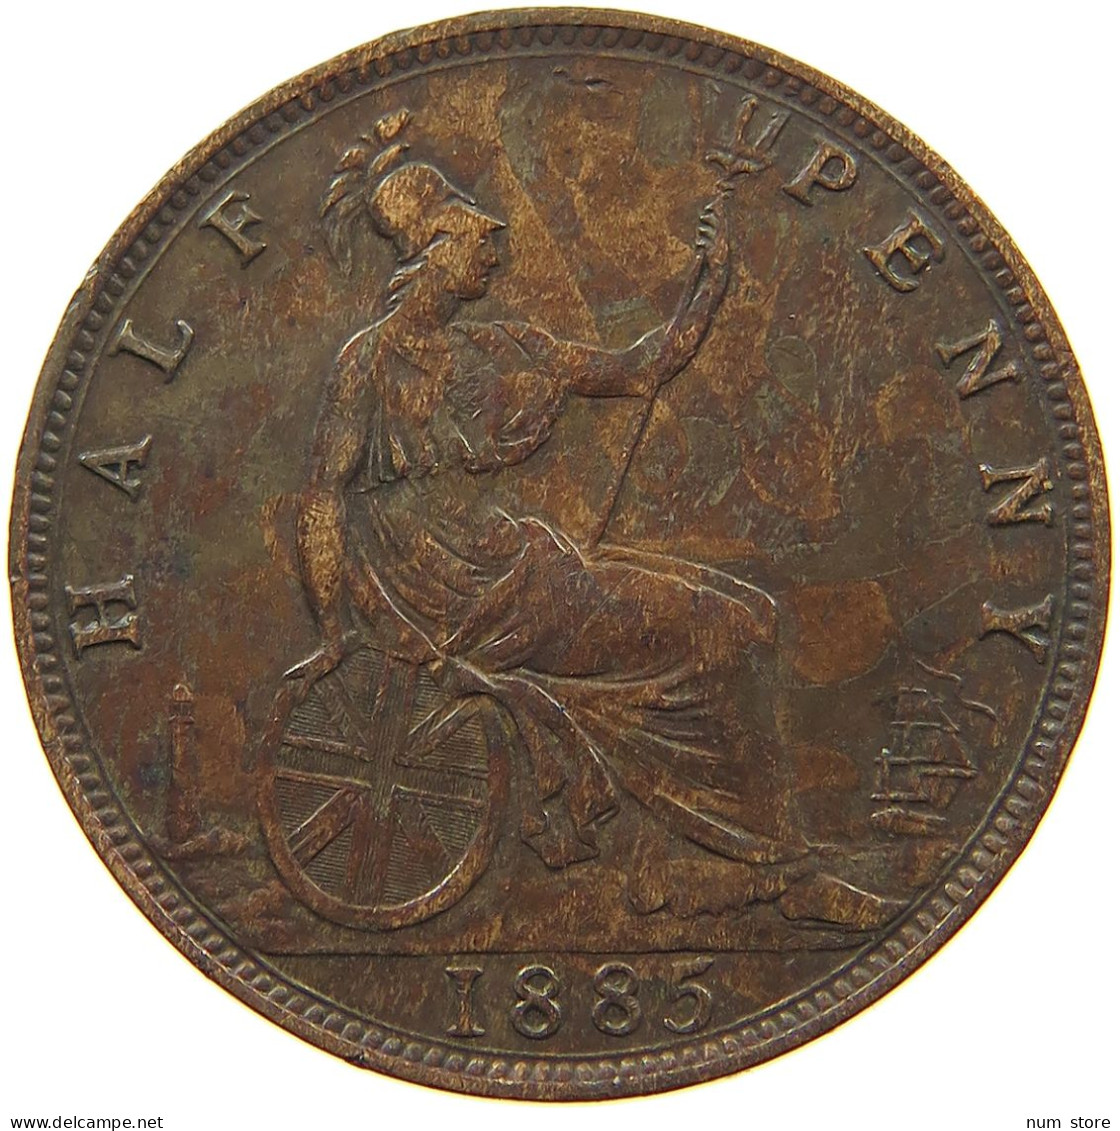 GREAT BRITAIN HALF PENNY 1885 VICTORIA 1837-1901 #MA 021750 - A. 1/4 - 1/3 - 1/2 Farthing